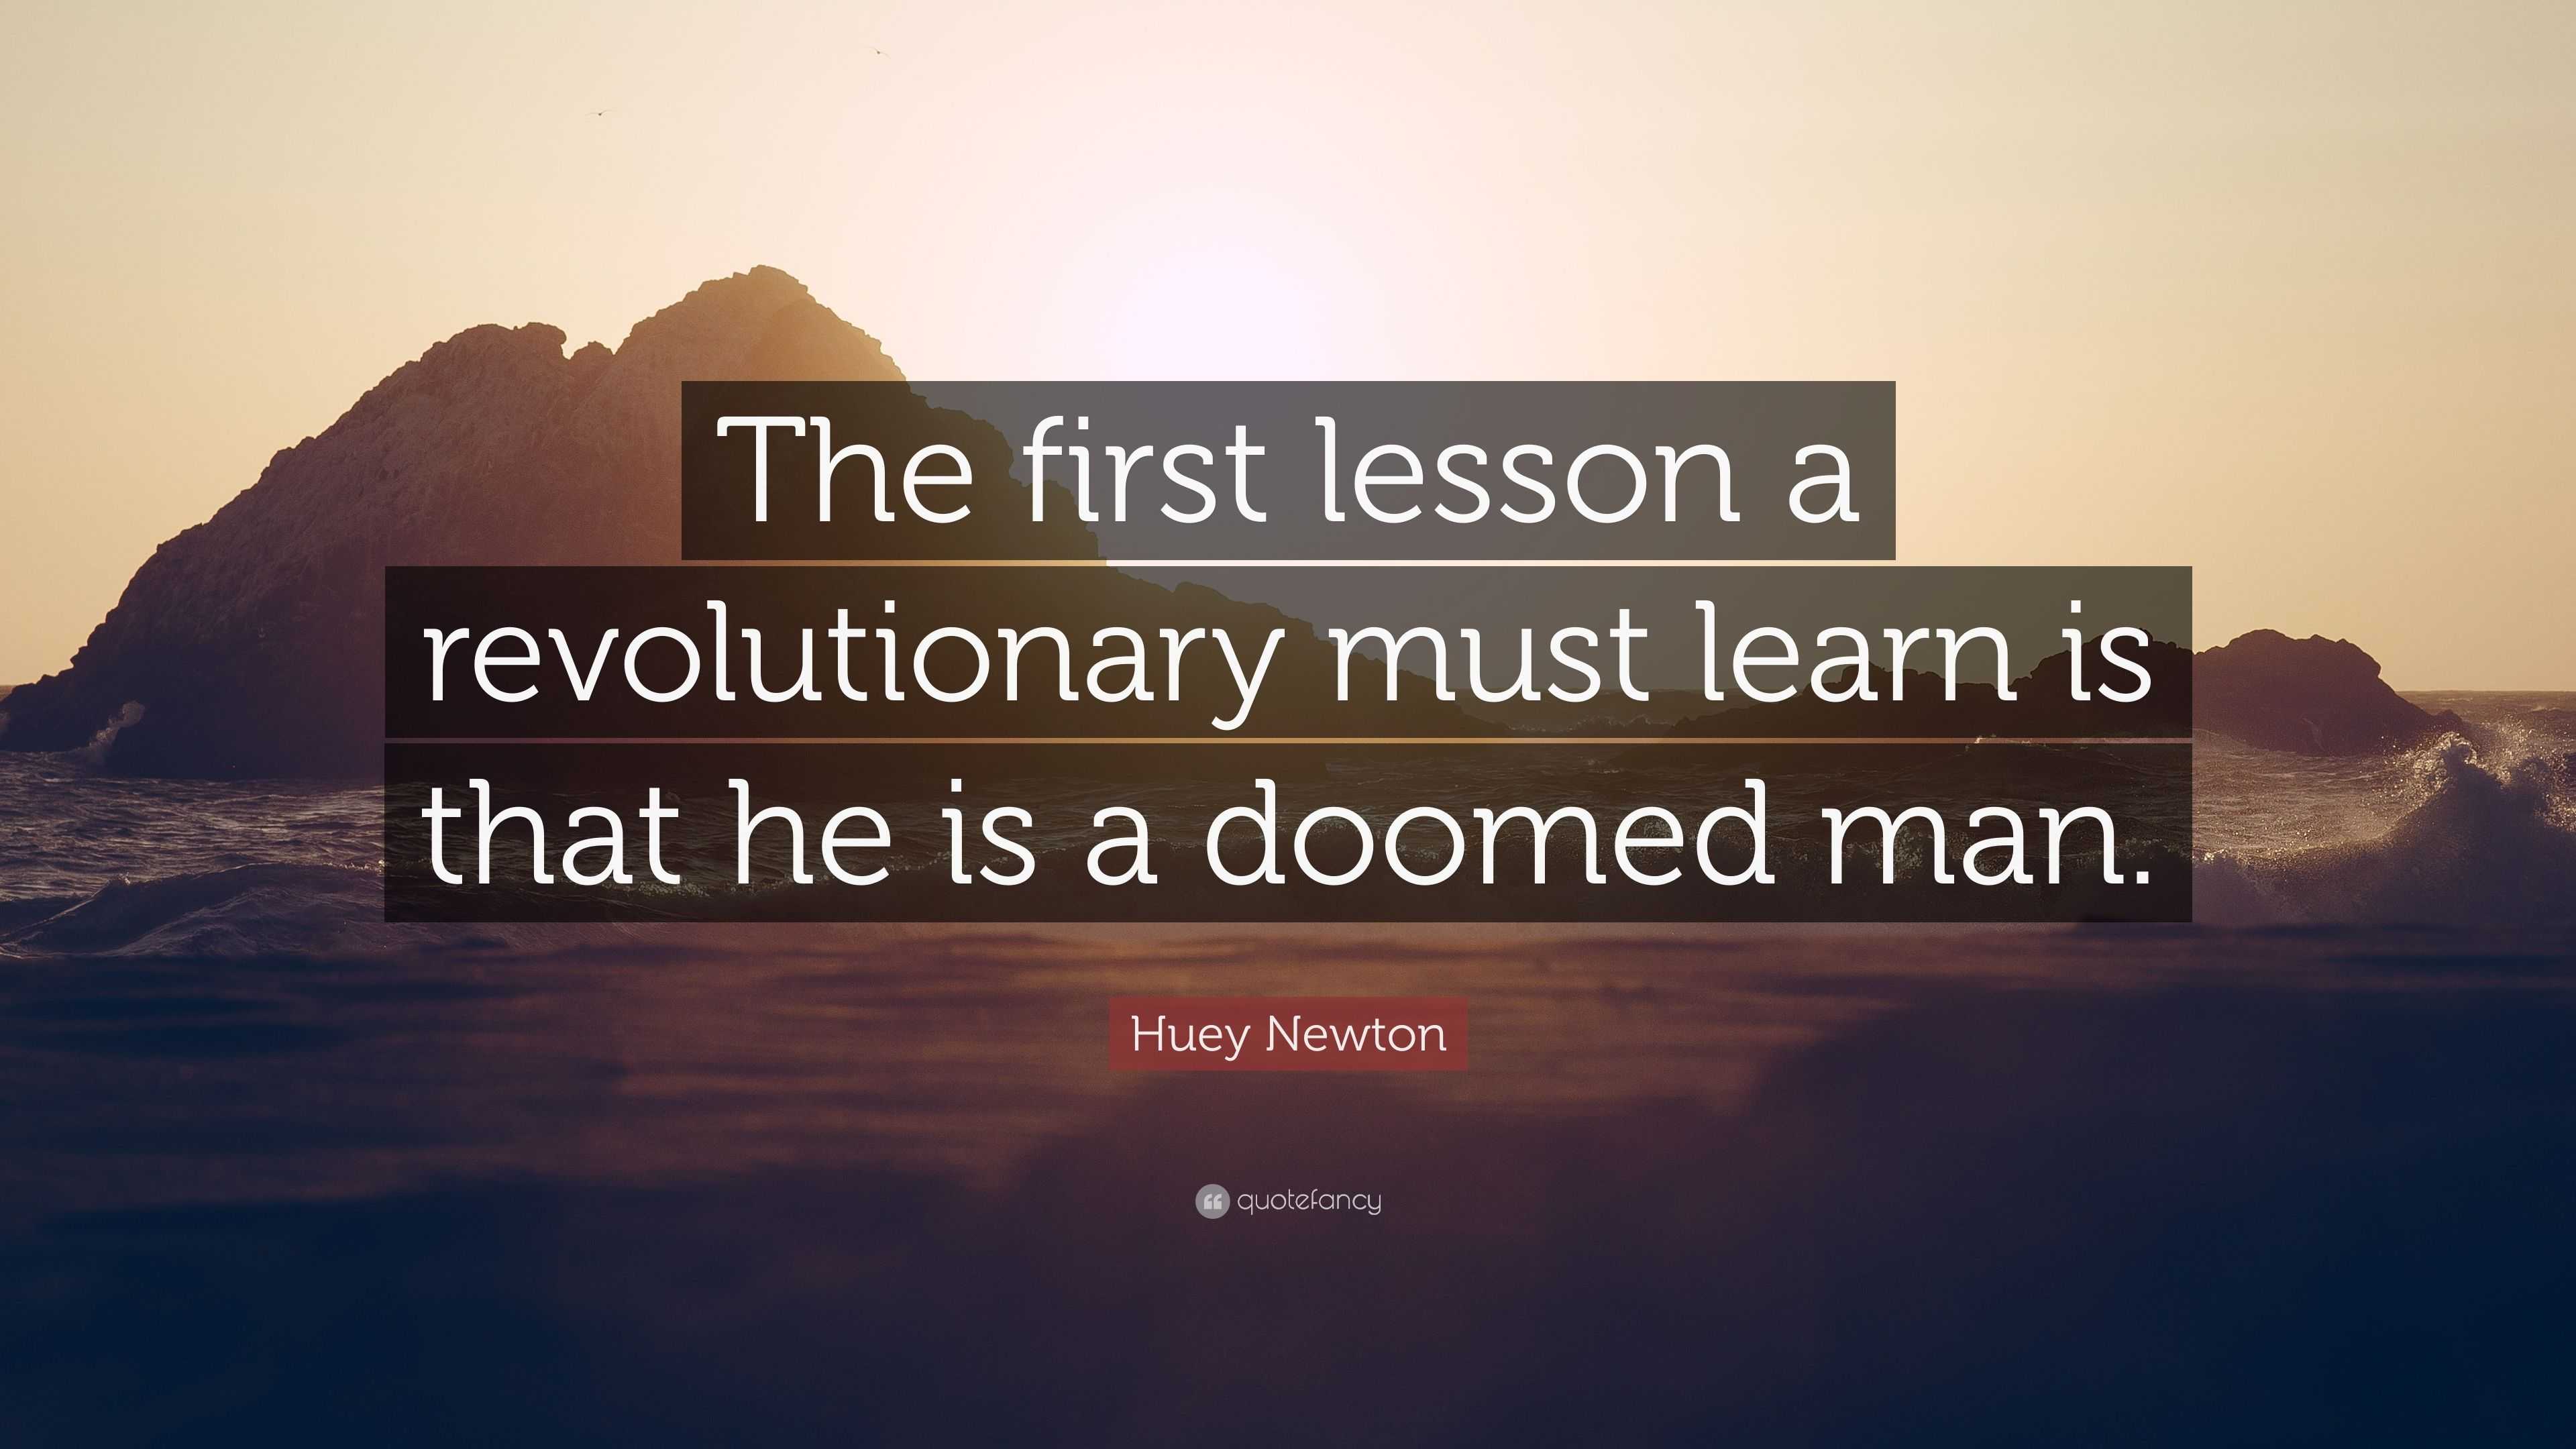 The first lesson a revolutionary must learn - Quote